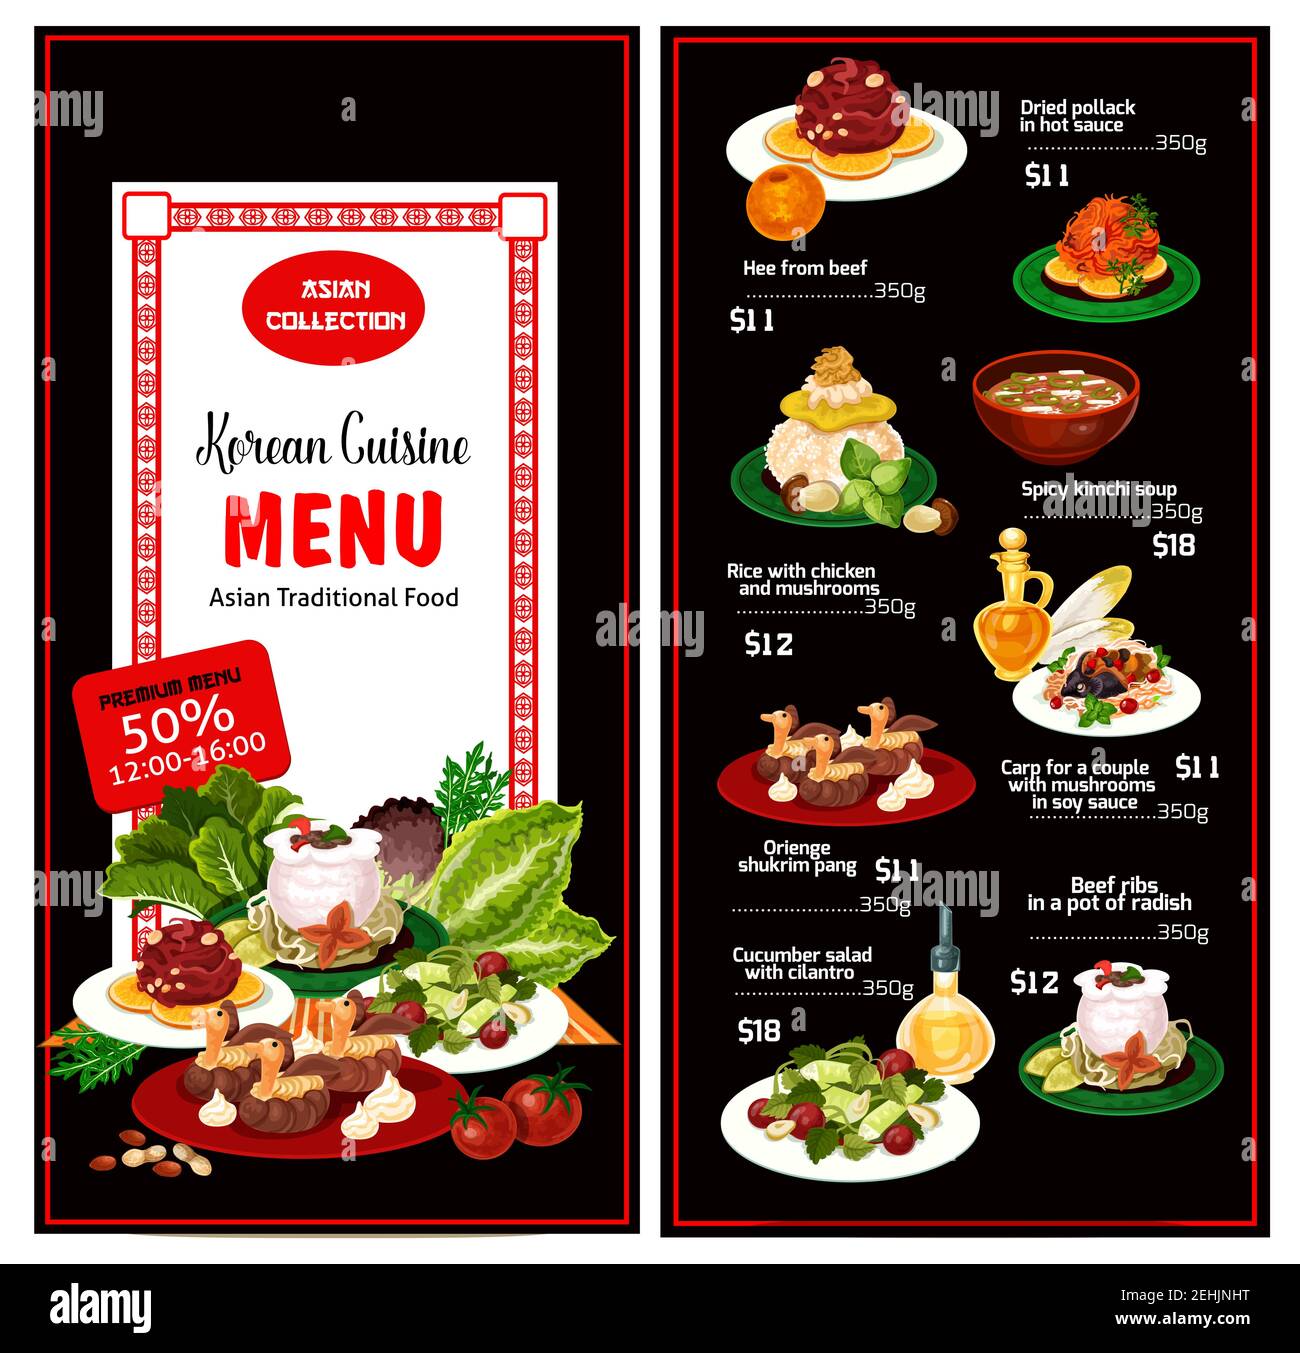 Korean cuisine traditional food menu. Vector lunch with dried pollack in hot sauce, beef hee or spicy kimchi soup and rice with chicken and mushrooms, Stock Vector